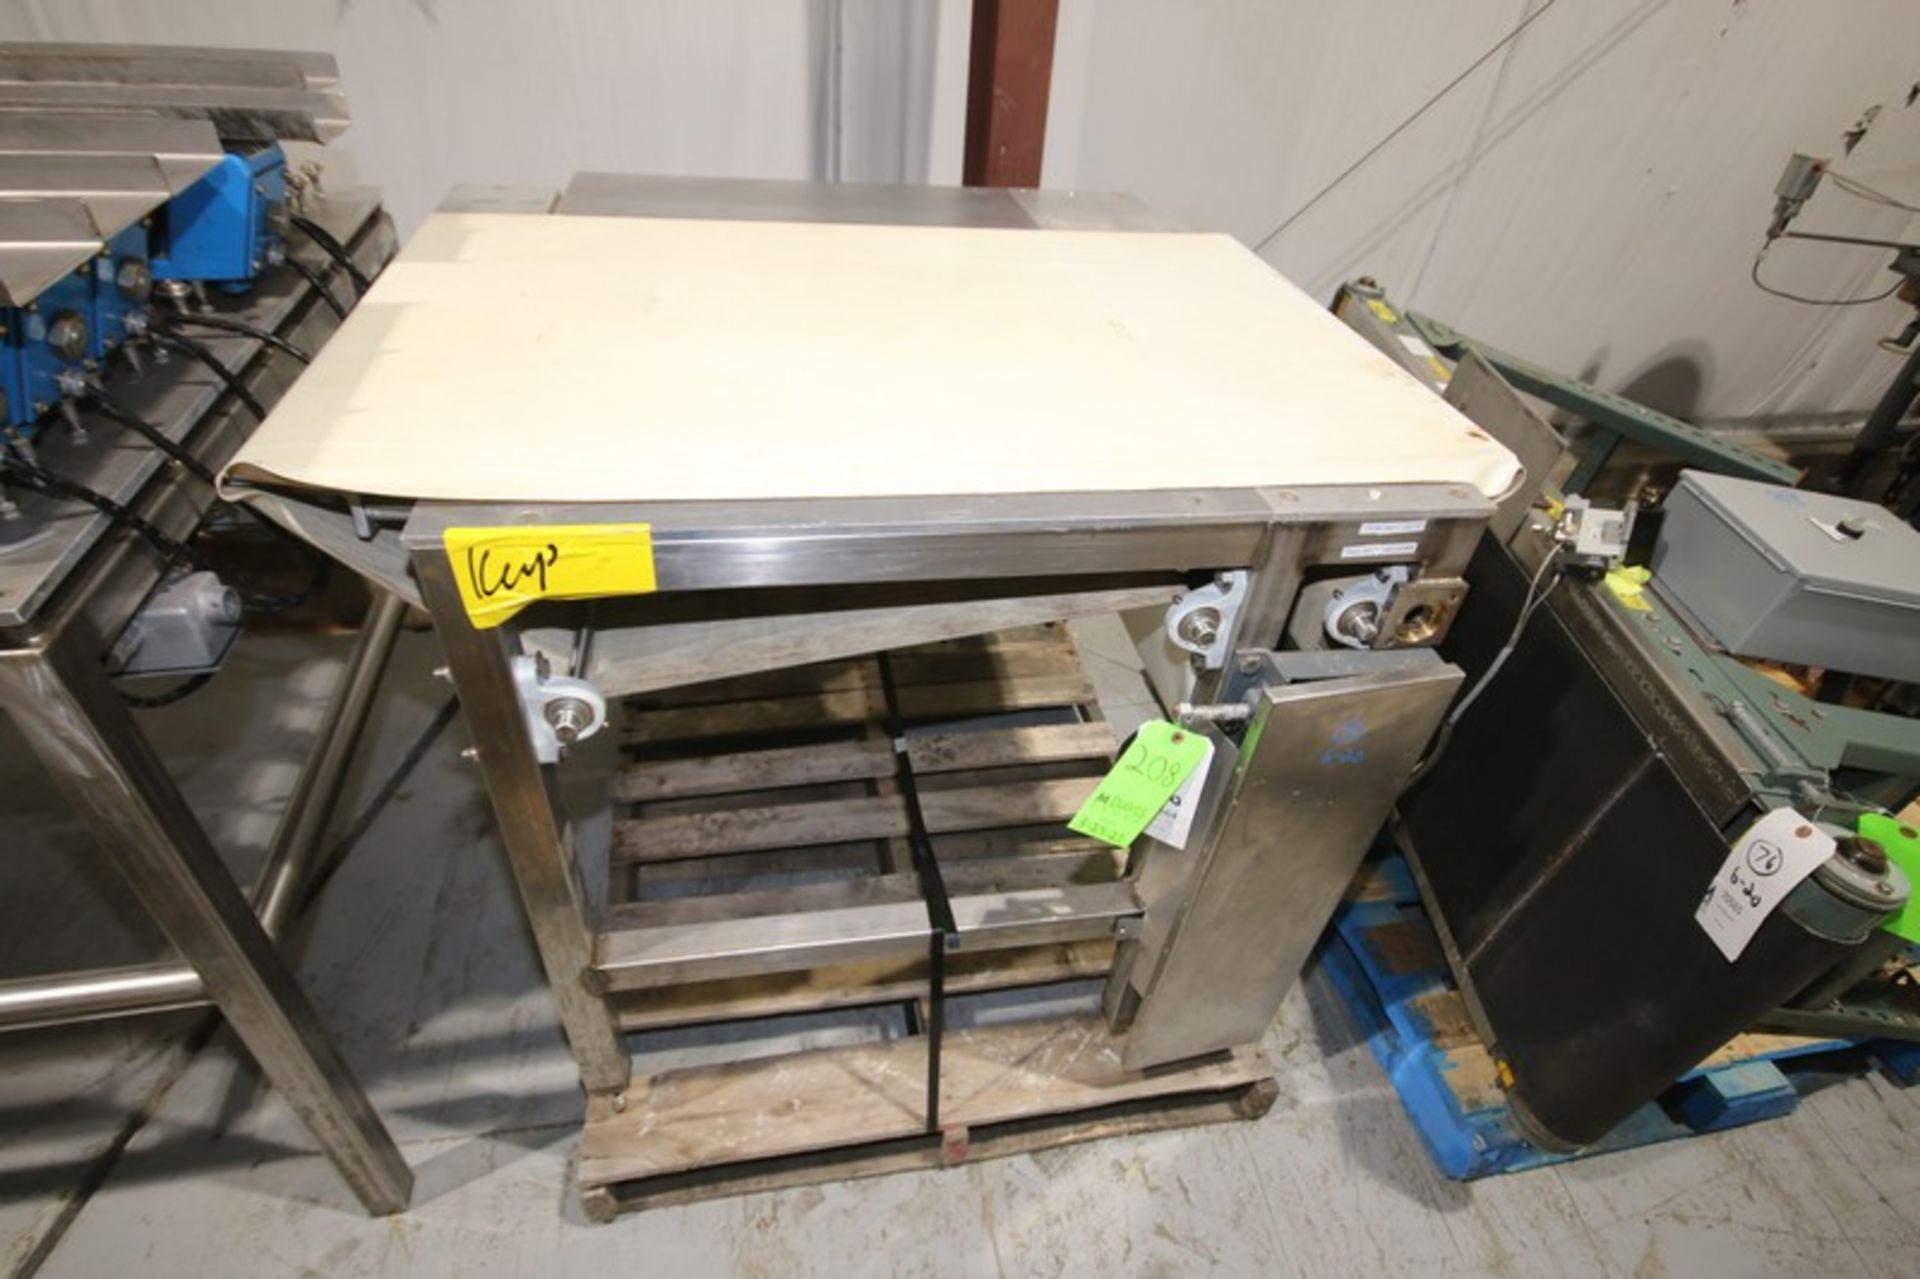 48" L x 32" W x 38" H S/S Power Belt Conveyor, with Drive Motor (INV#70564) (Located @ the MDG